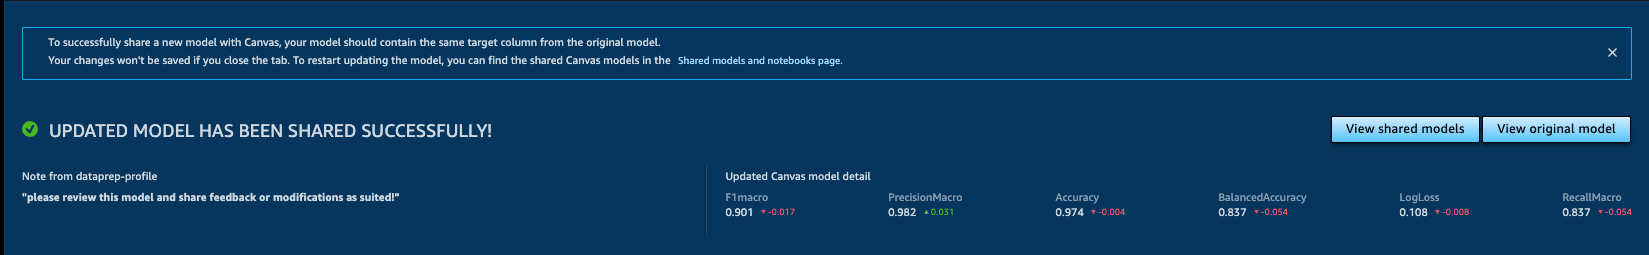 Screenshot of the success message for sharing a model update with the Canvas user.